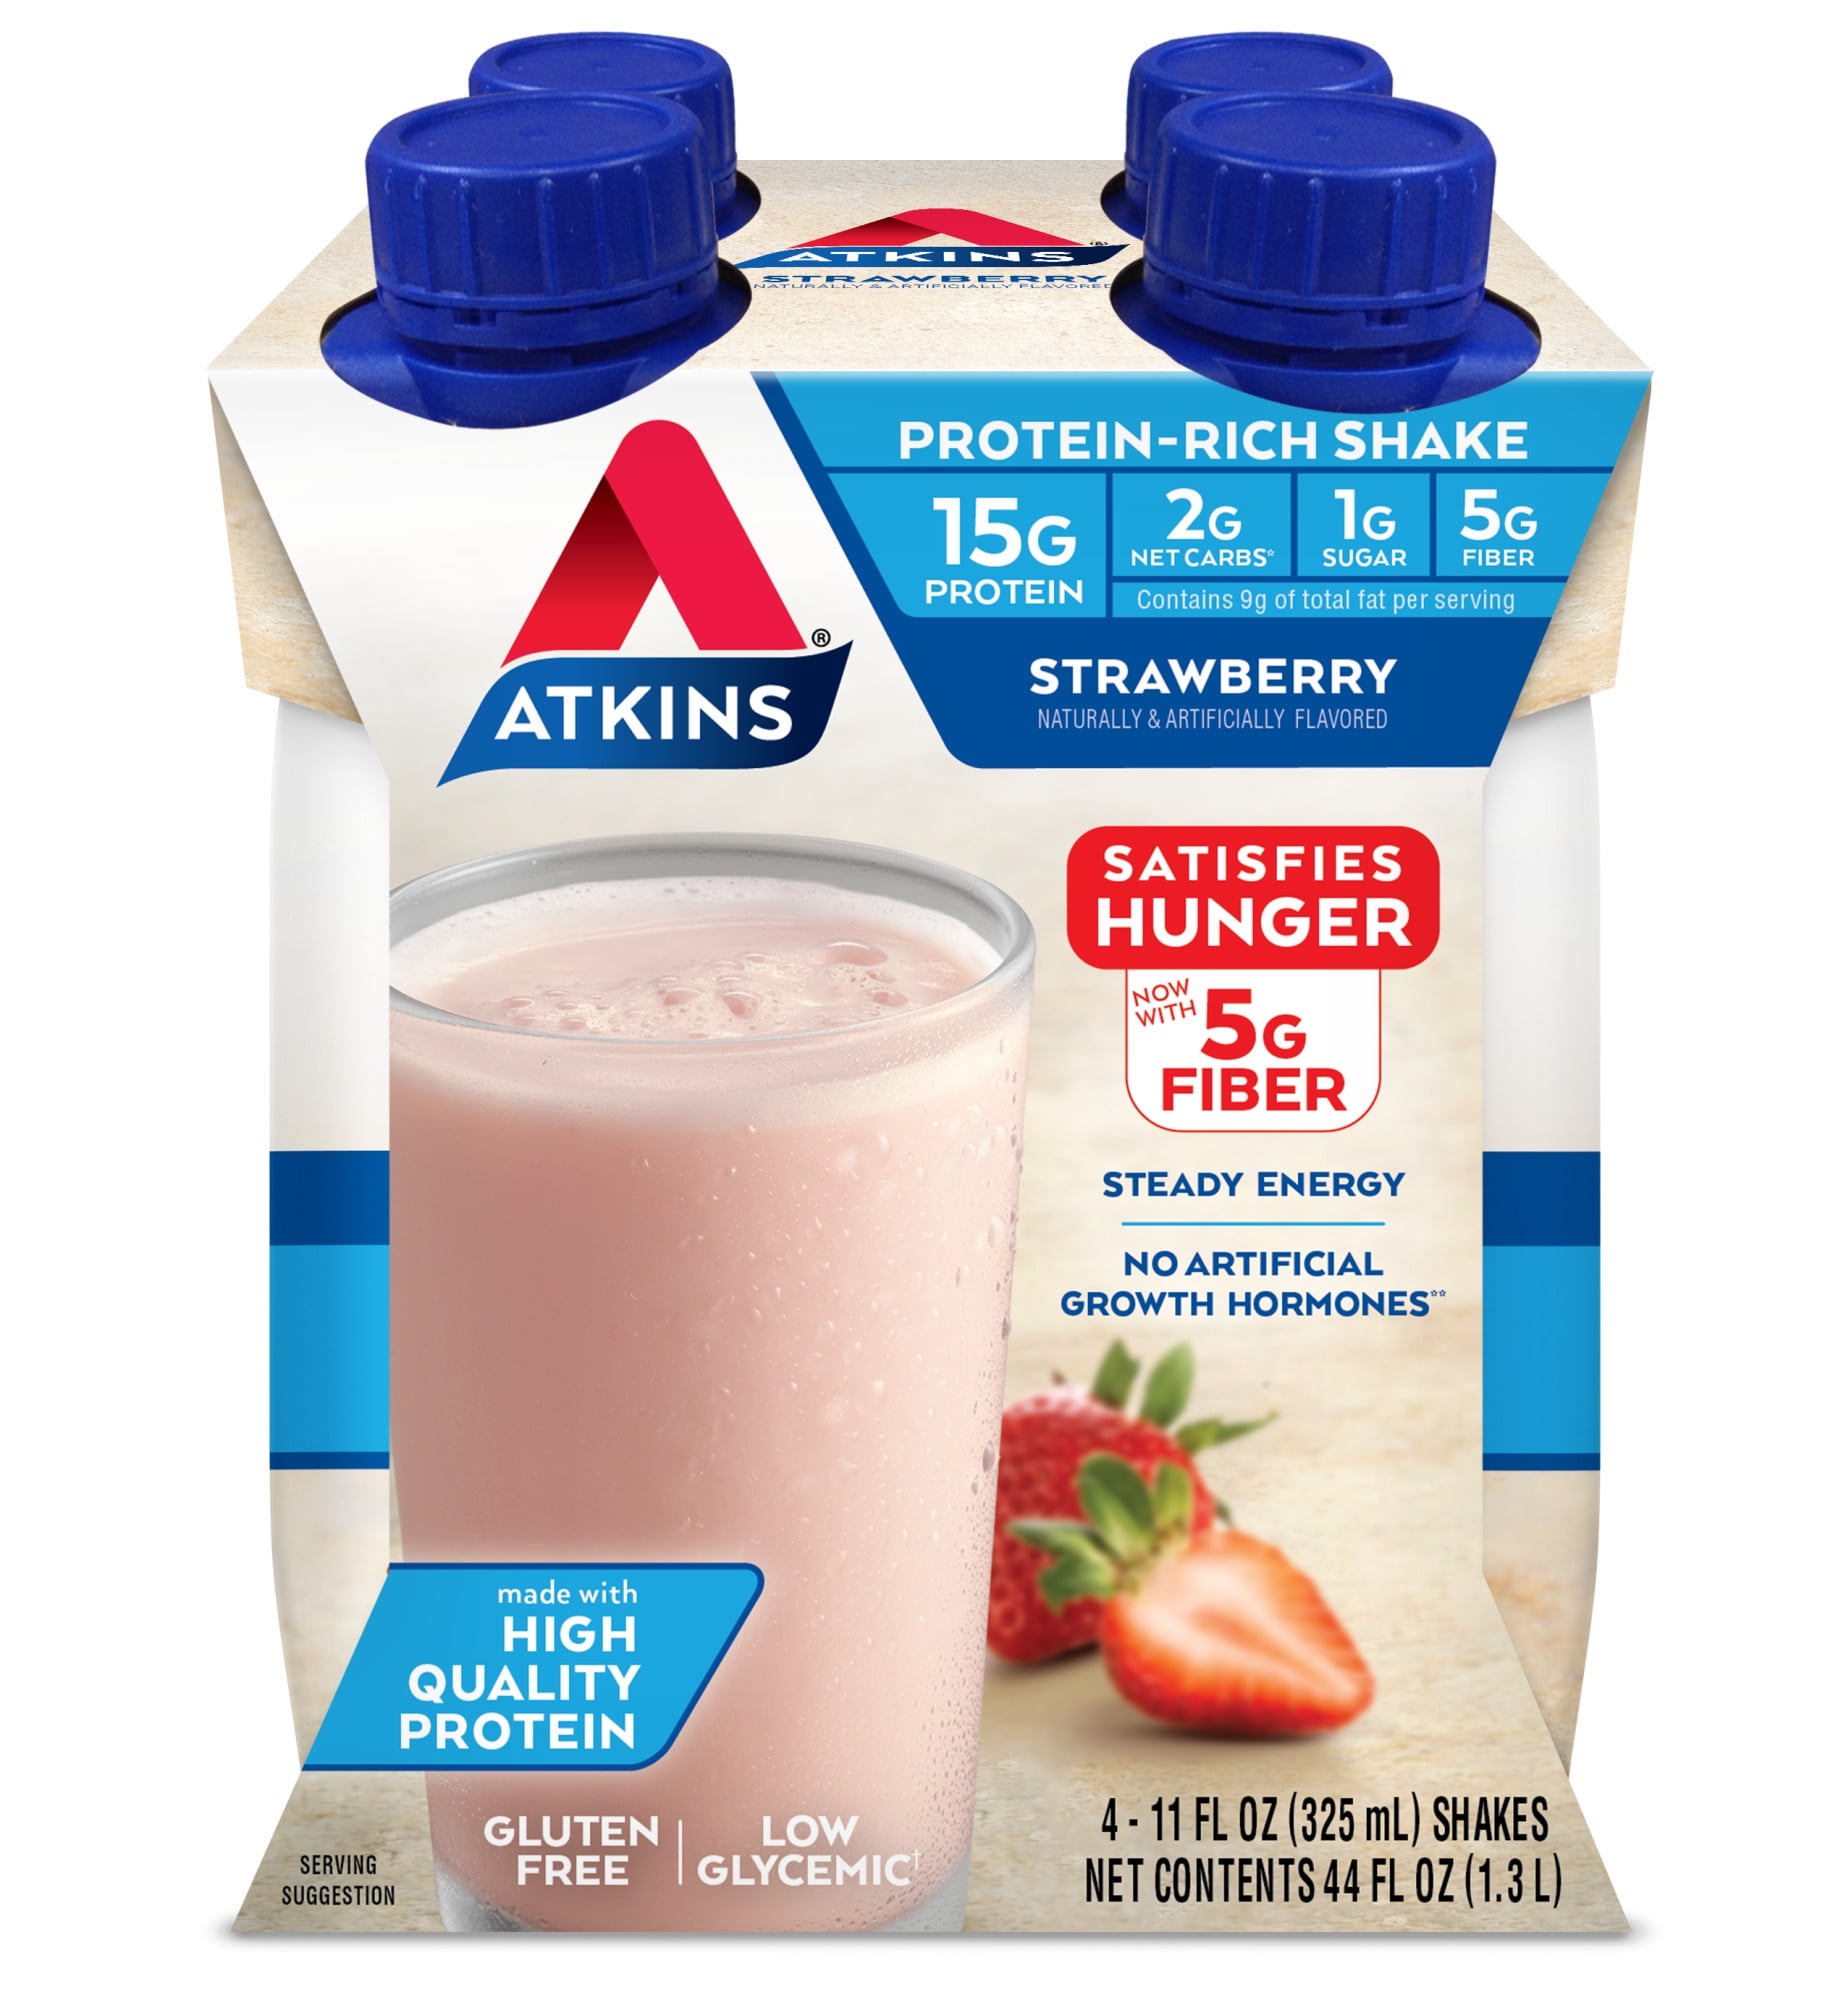 Atkins Gluten Free Protein-Rich Shake, Strawberry, Keto Friendly, 4 Count (Ready to Drink)